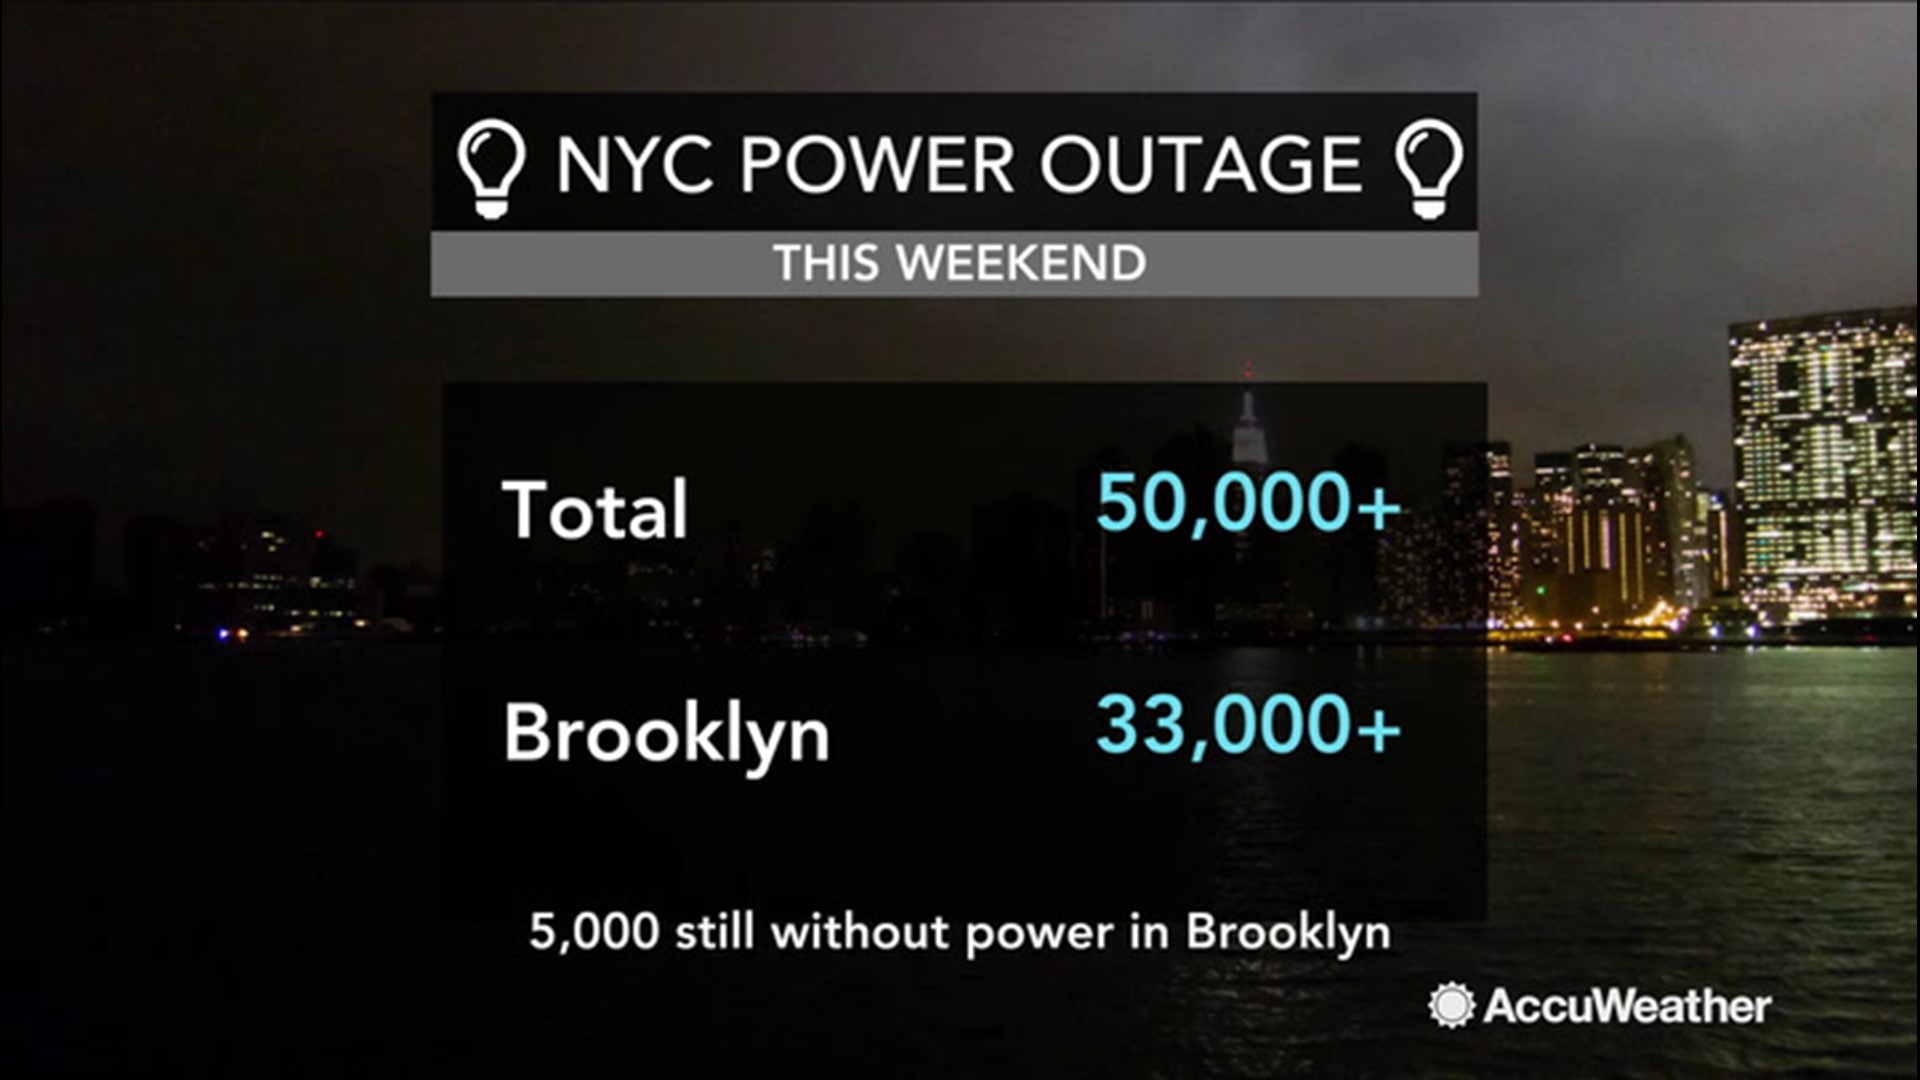 AccuWeather's Dexter Henry reports from Brooklyn, New York where 33,000 Con Edison customers were in the dark after a weekend heatwave in New York City.